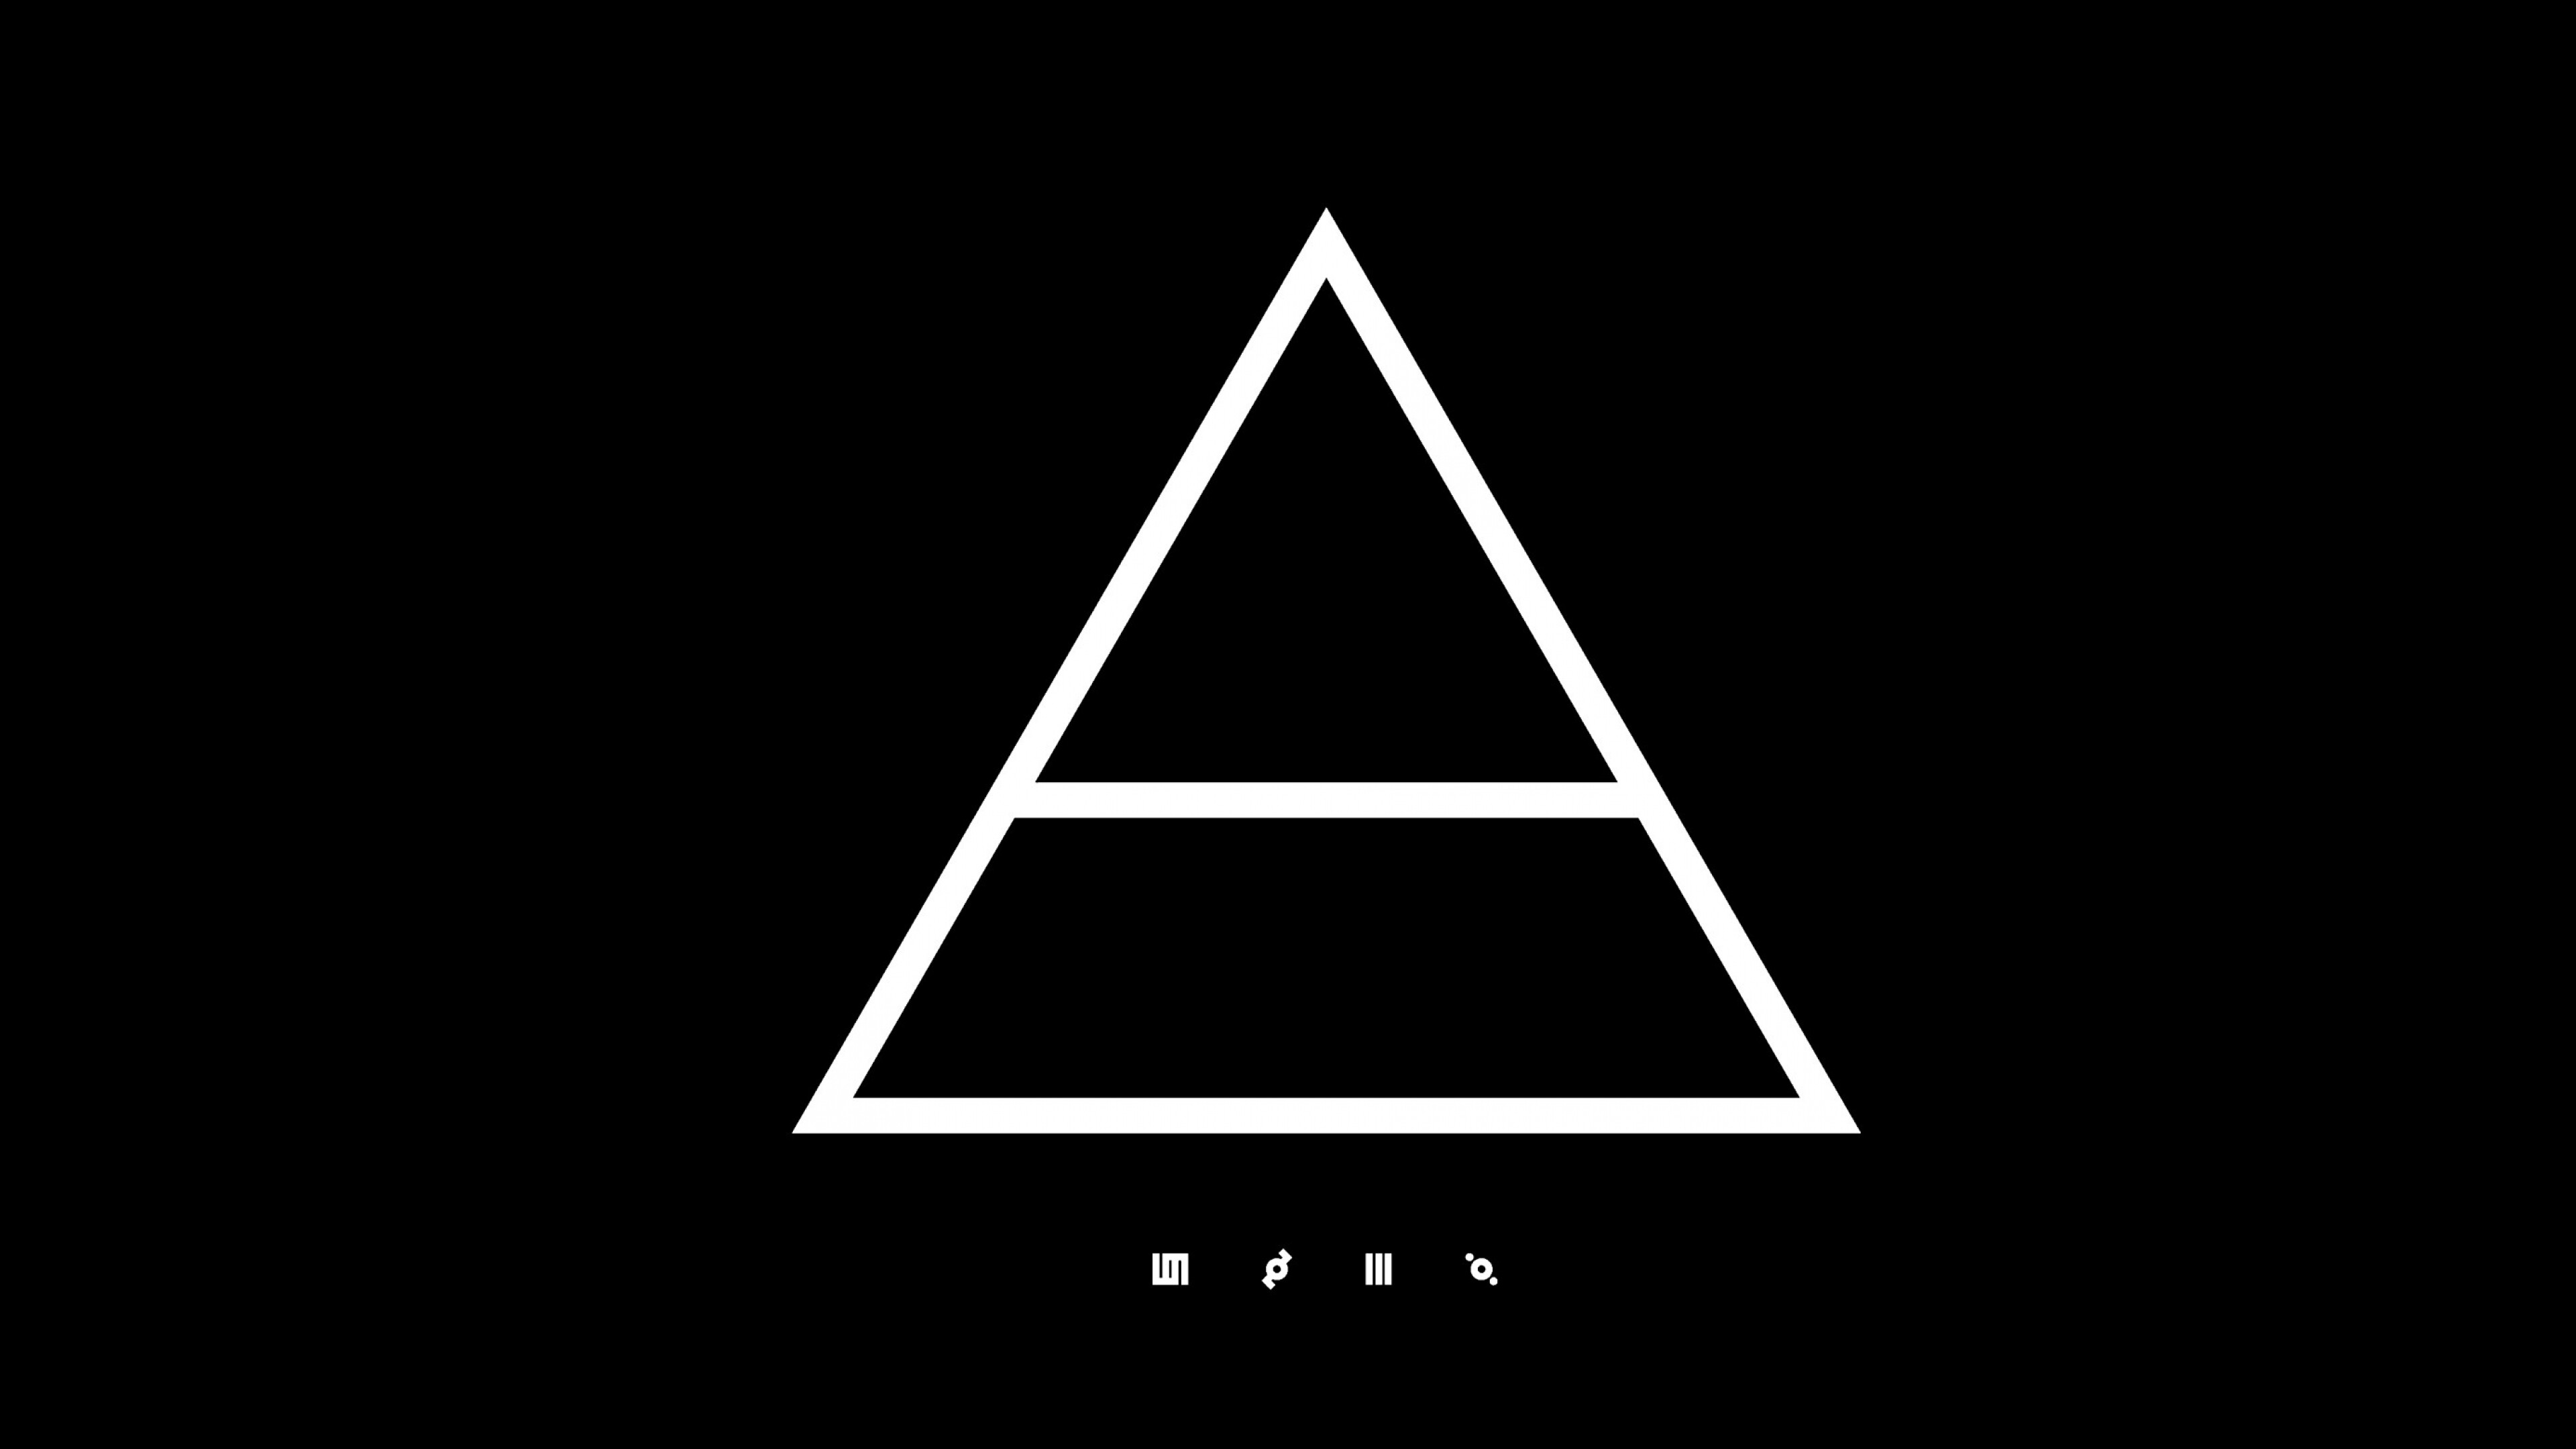 Thirty Seconds to Mars: An American rock band from Los Angeles, California, formed in 1998. 3840x2160 4K Background.